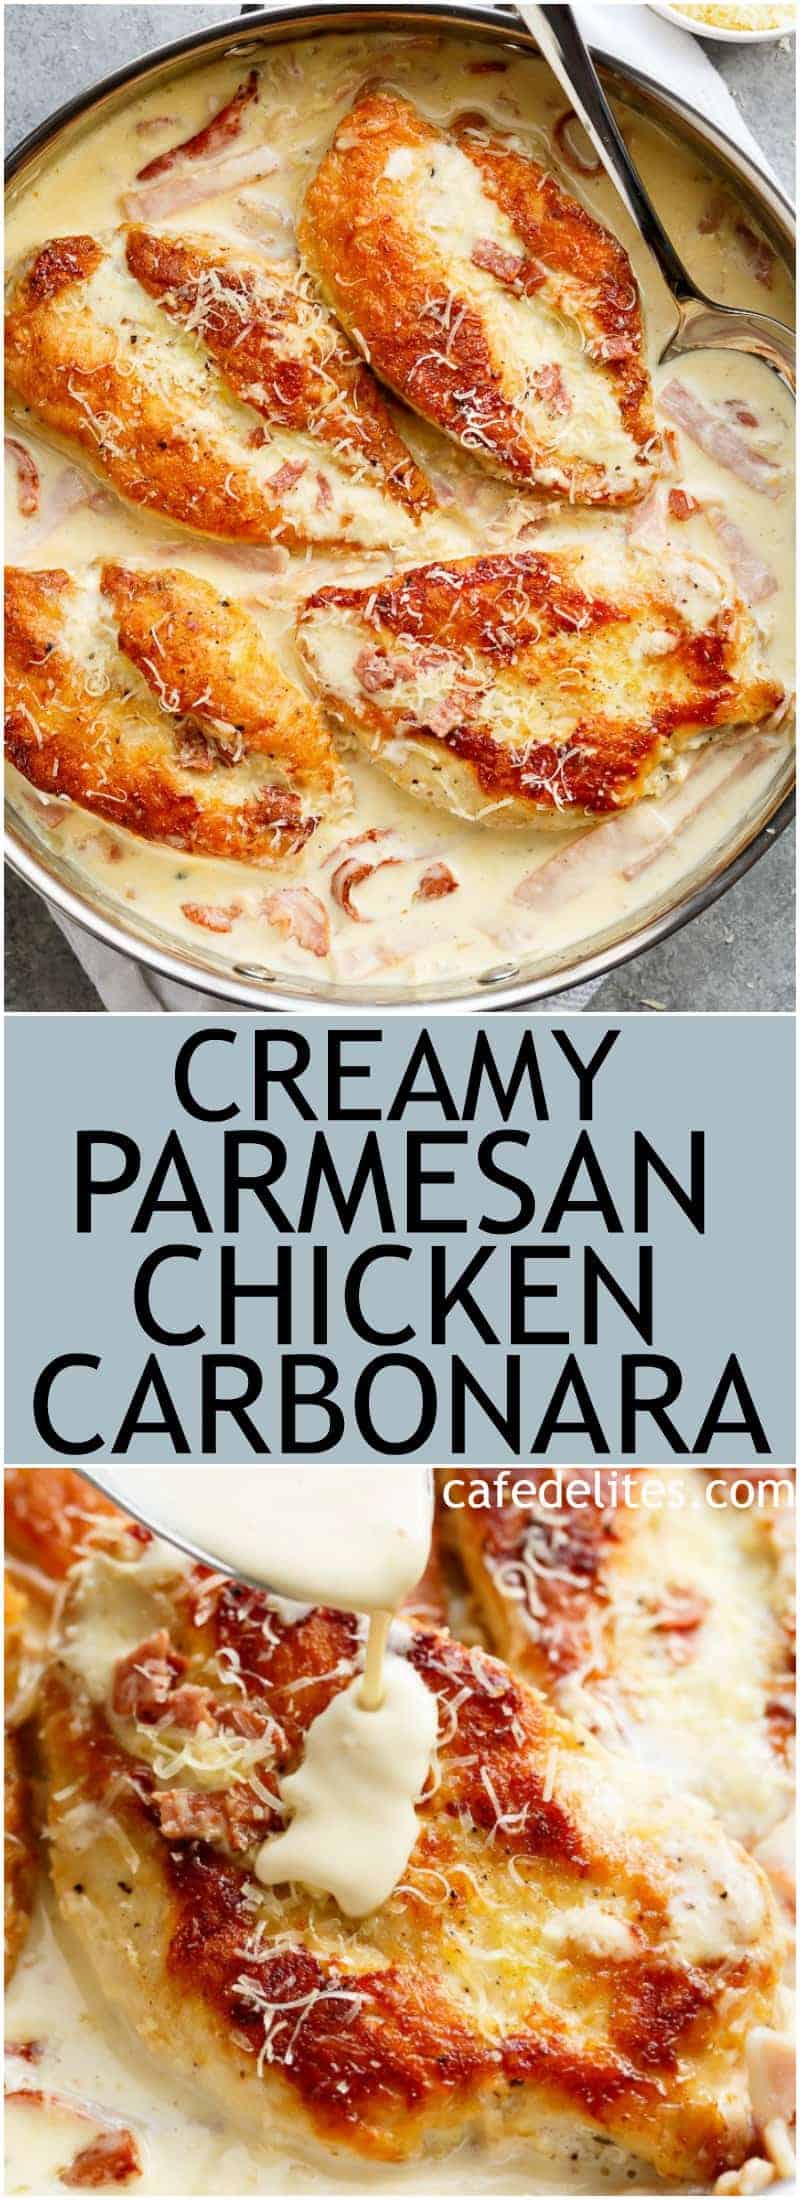 Creamy Parmesan Chicken Carbonara is the ultimate twist! Crispy, golden chicken fillets in a carbonara inspired sauce for a new favourite chicken recipe! | https://cafedelites.com